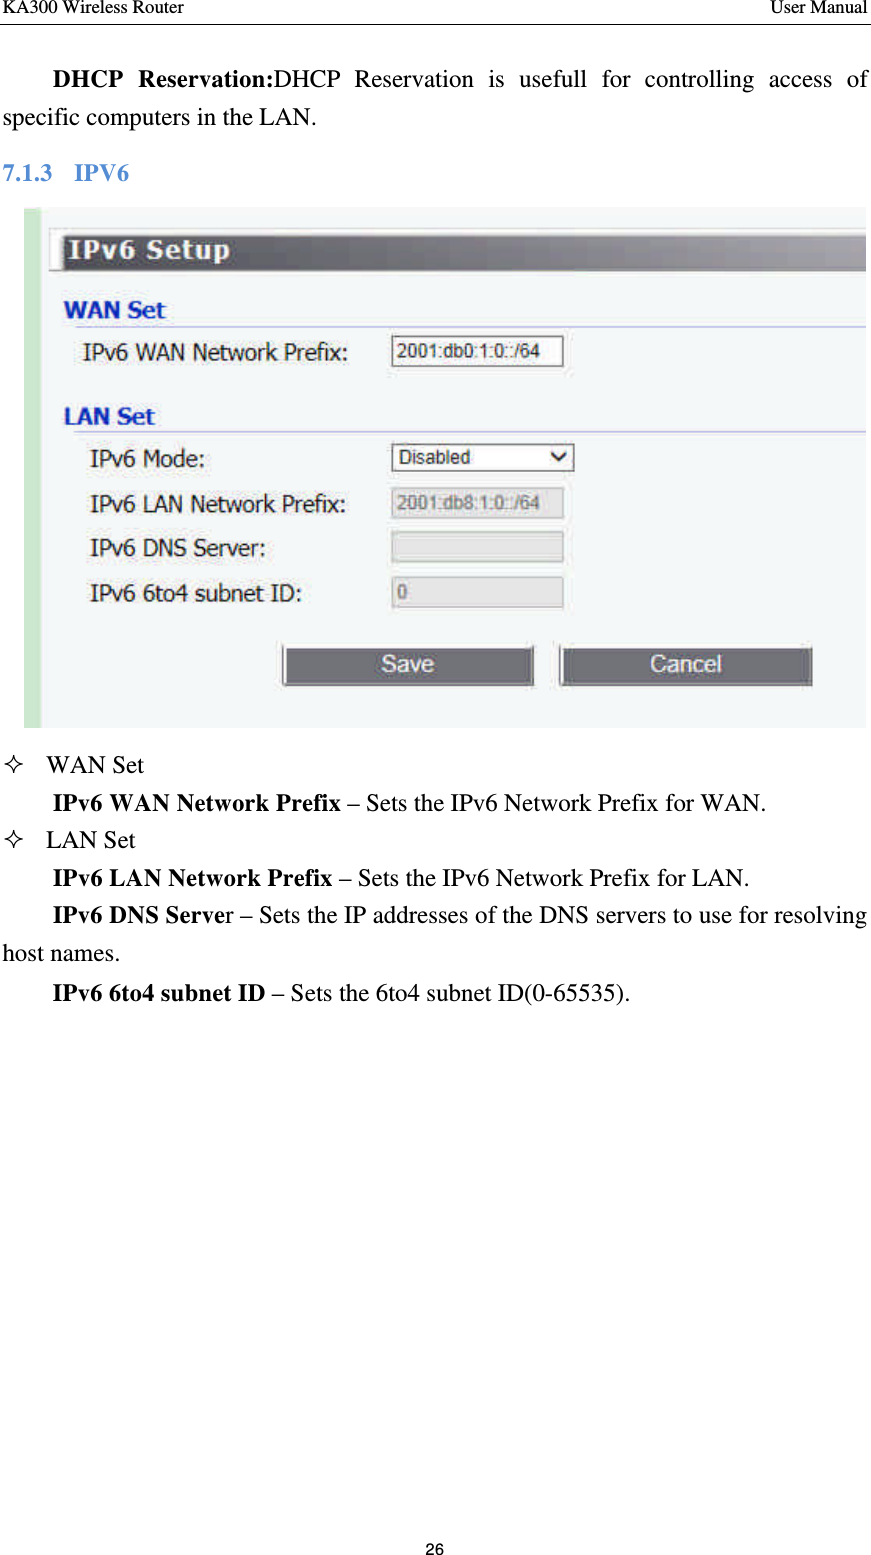 KA300 Wireless Router       User Manual 26  DHCP Reservation:DHCP Reservation is usefull for controlling access of specific computers in the LAN. 7.1.3  IPV6     ² WAN Set IPv6 WAN Network Prefix – Sets the IPv6 Network Prefix for WAN. ² LAN Set IPv6 LAN Network Prefix – Sets the IPv6 Network Prefix for LAN. IPv6 DNS Server – Sets the IP addresses of the DNS servers to use for resolving host names.   IPv6 6to4 subnet ID – Sets the 6to4 subnet ID(0-65535).   